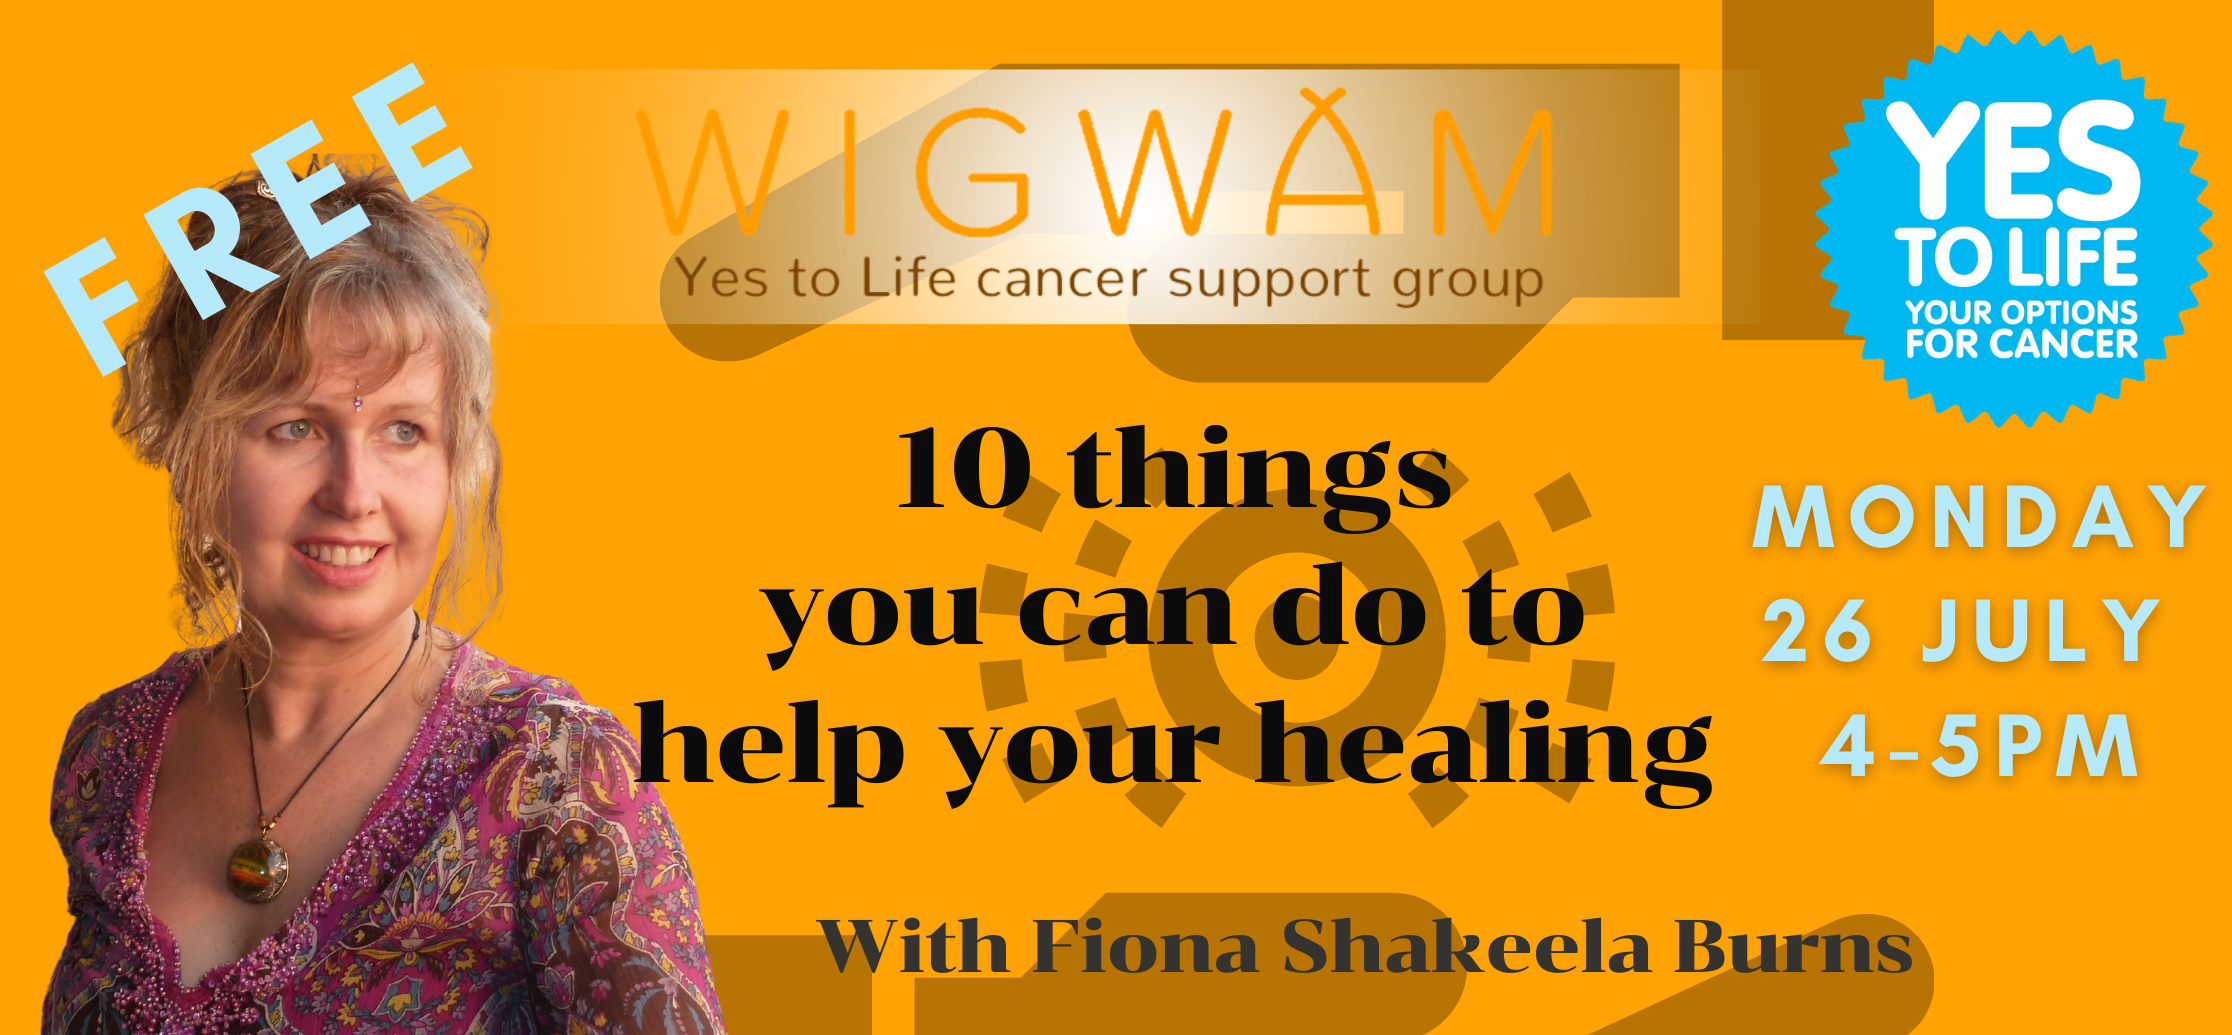 WIGWAM: 10 things you can do to help your healing with Fiona Shakeela Burns